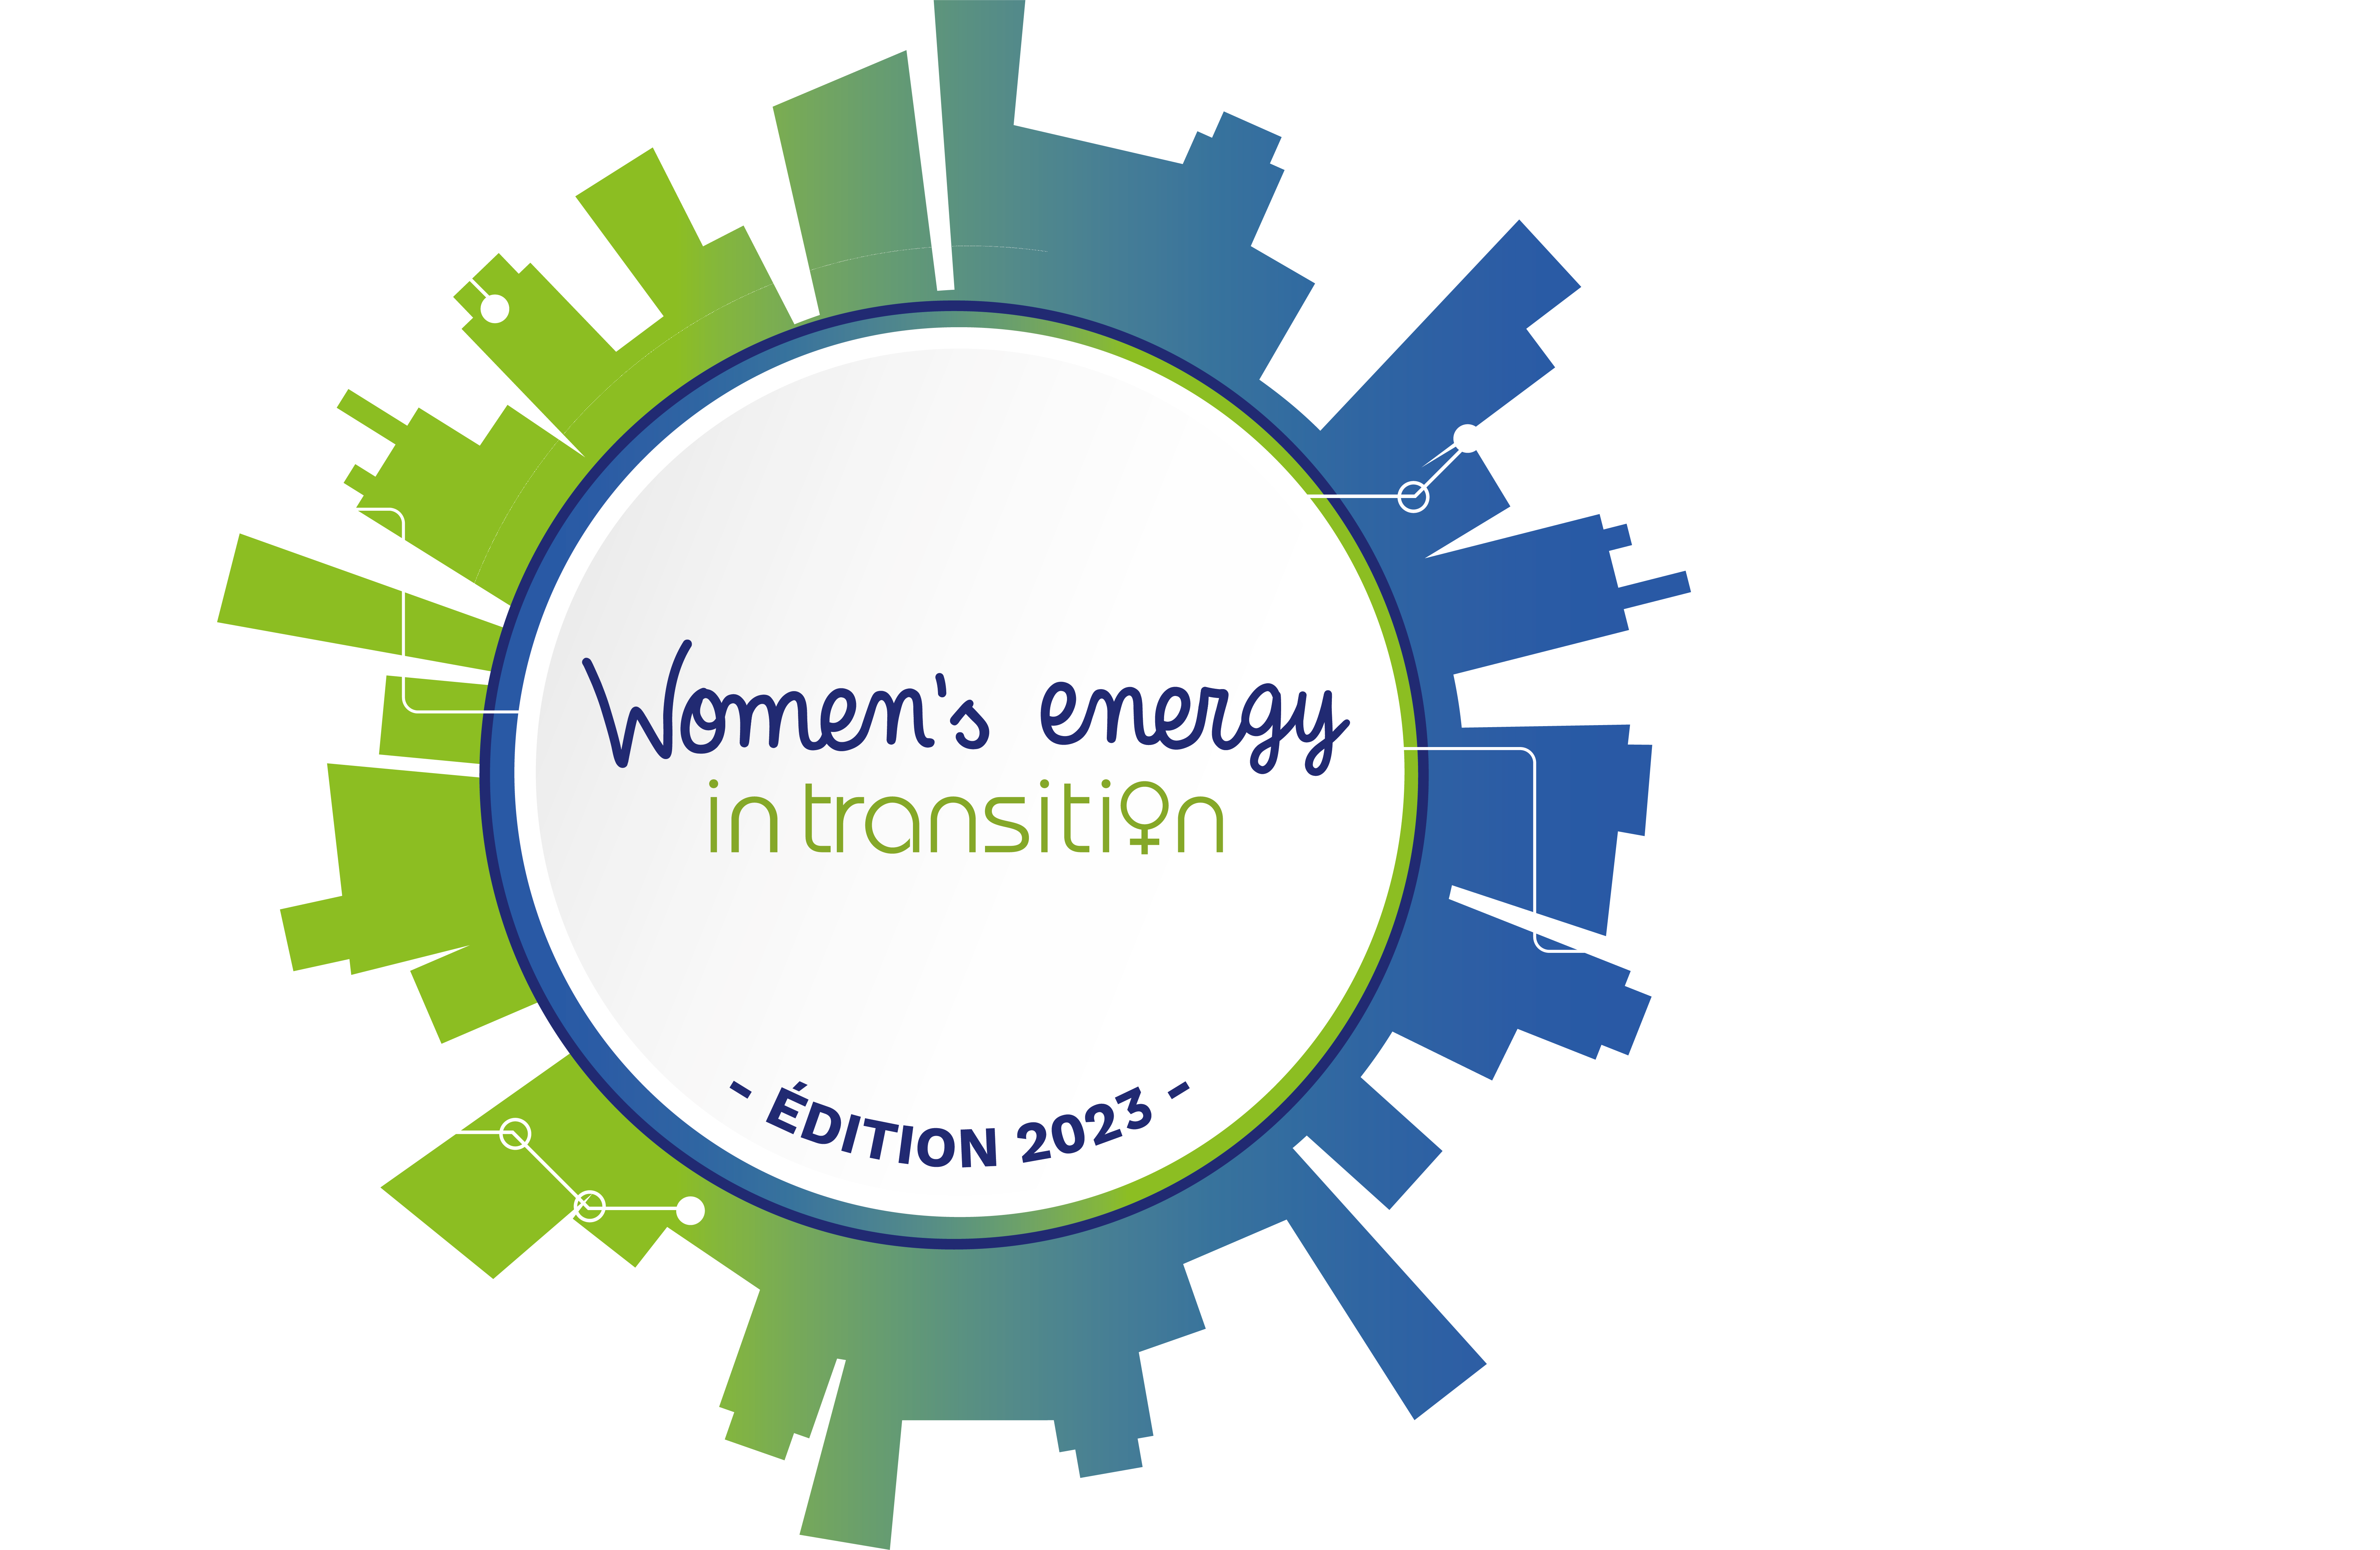 Women's energy in transition 2023